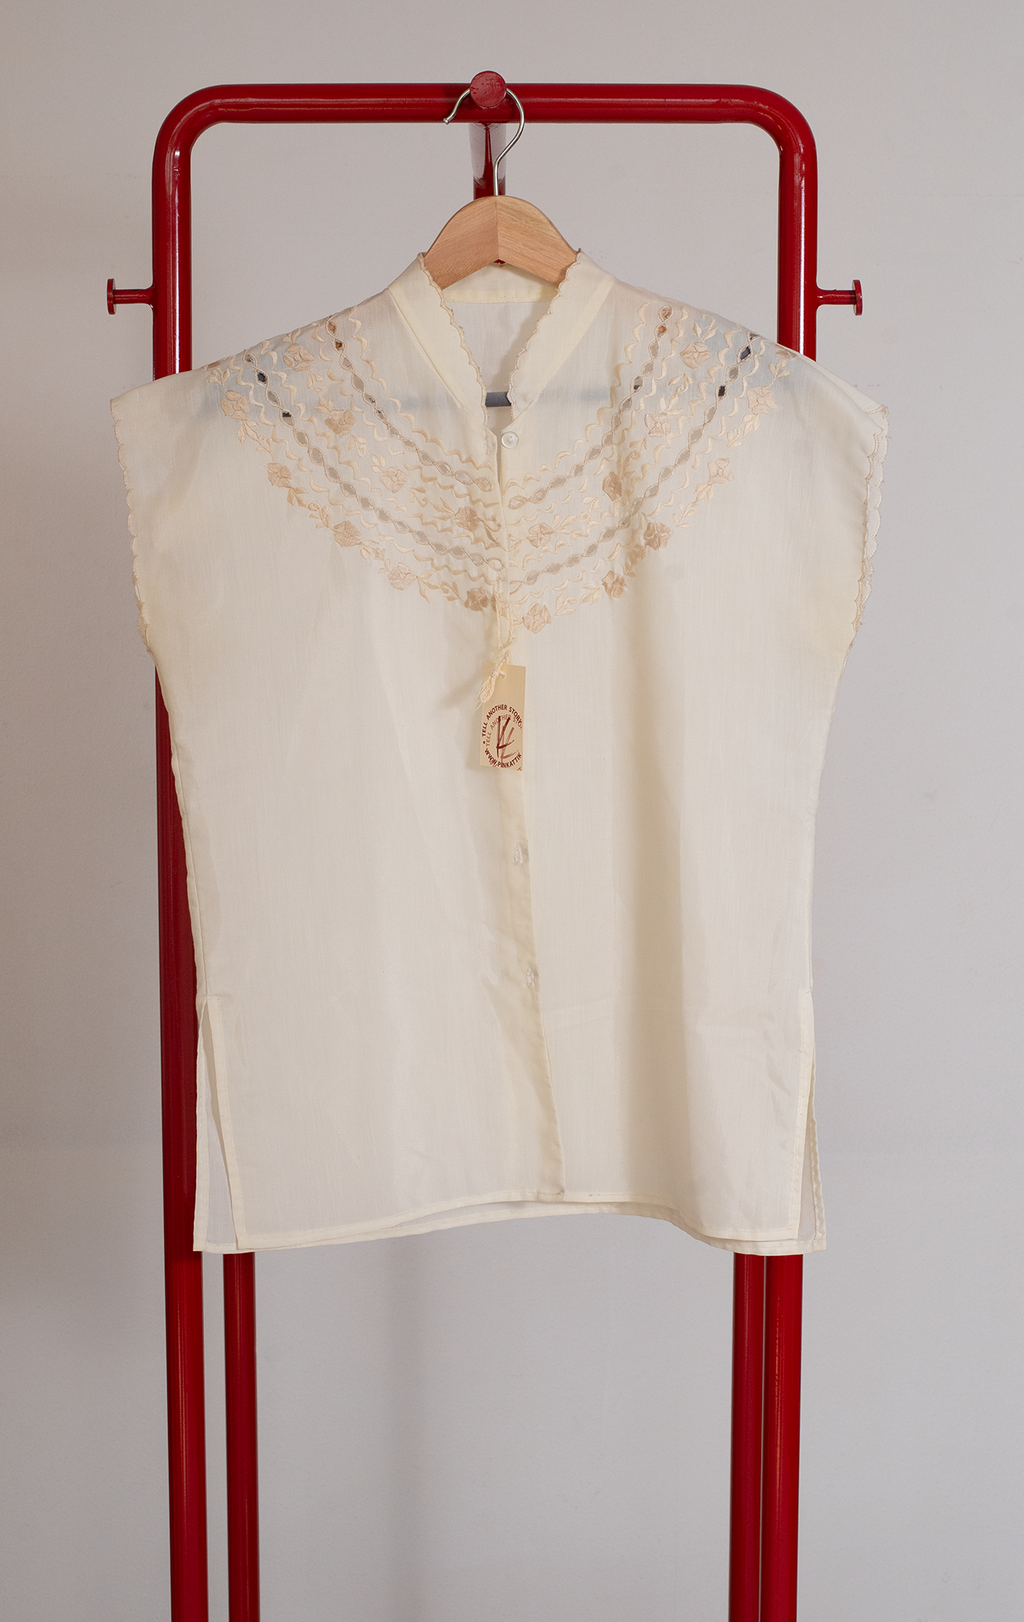 SHIRT - Beige vintage with embroidery - Small/ Medium